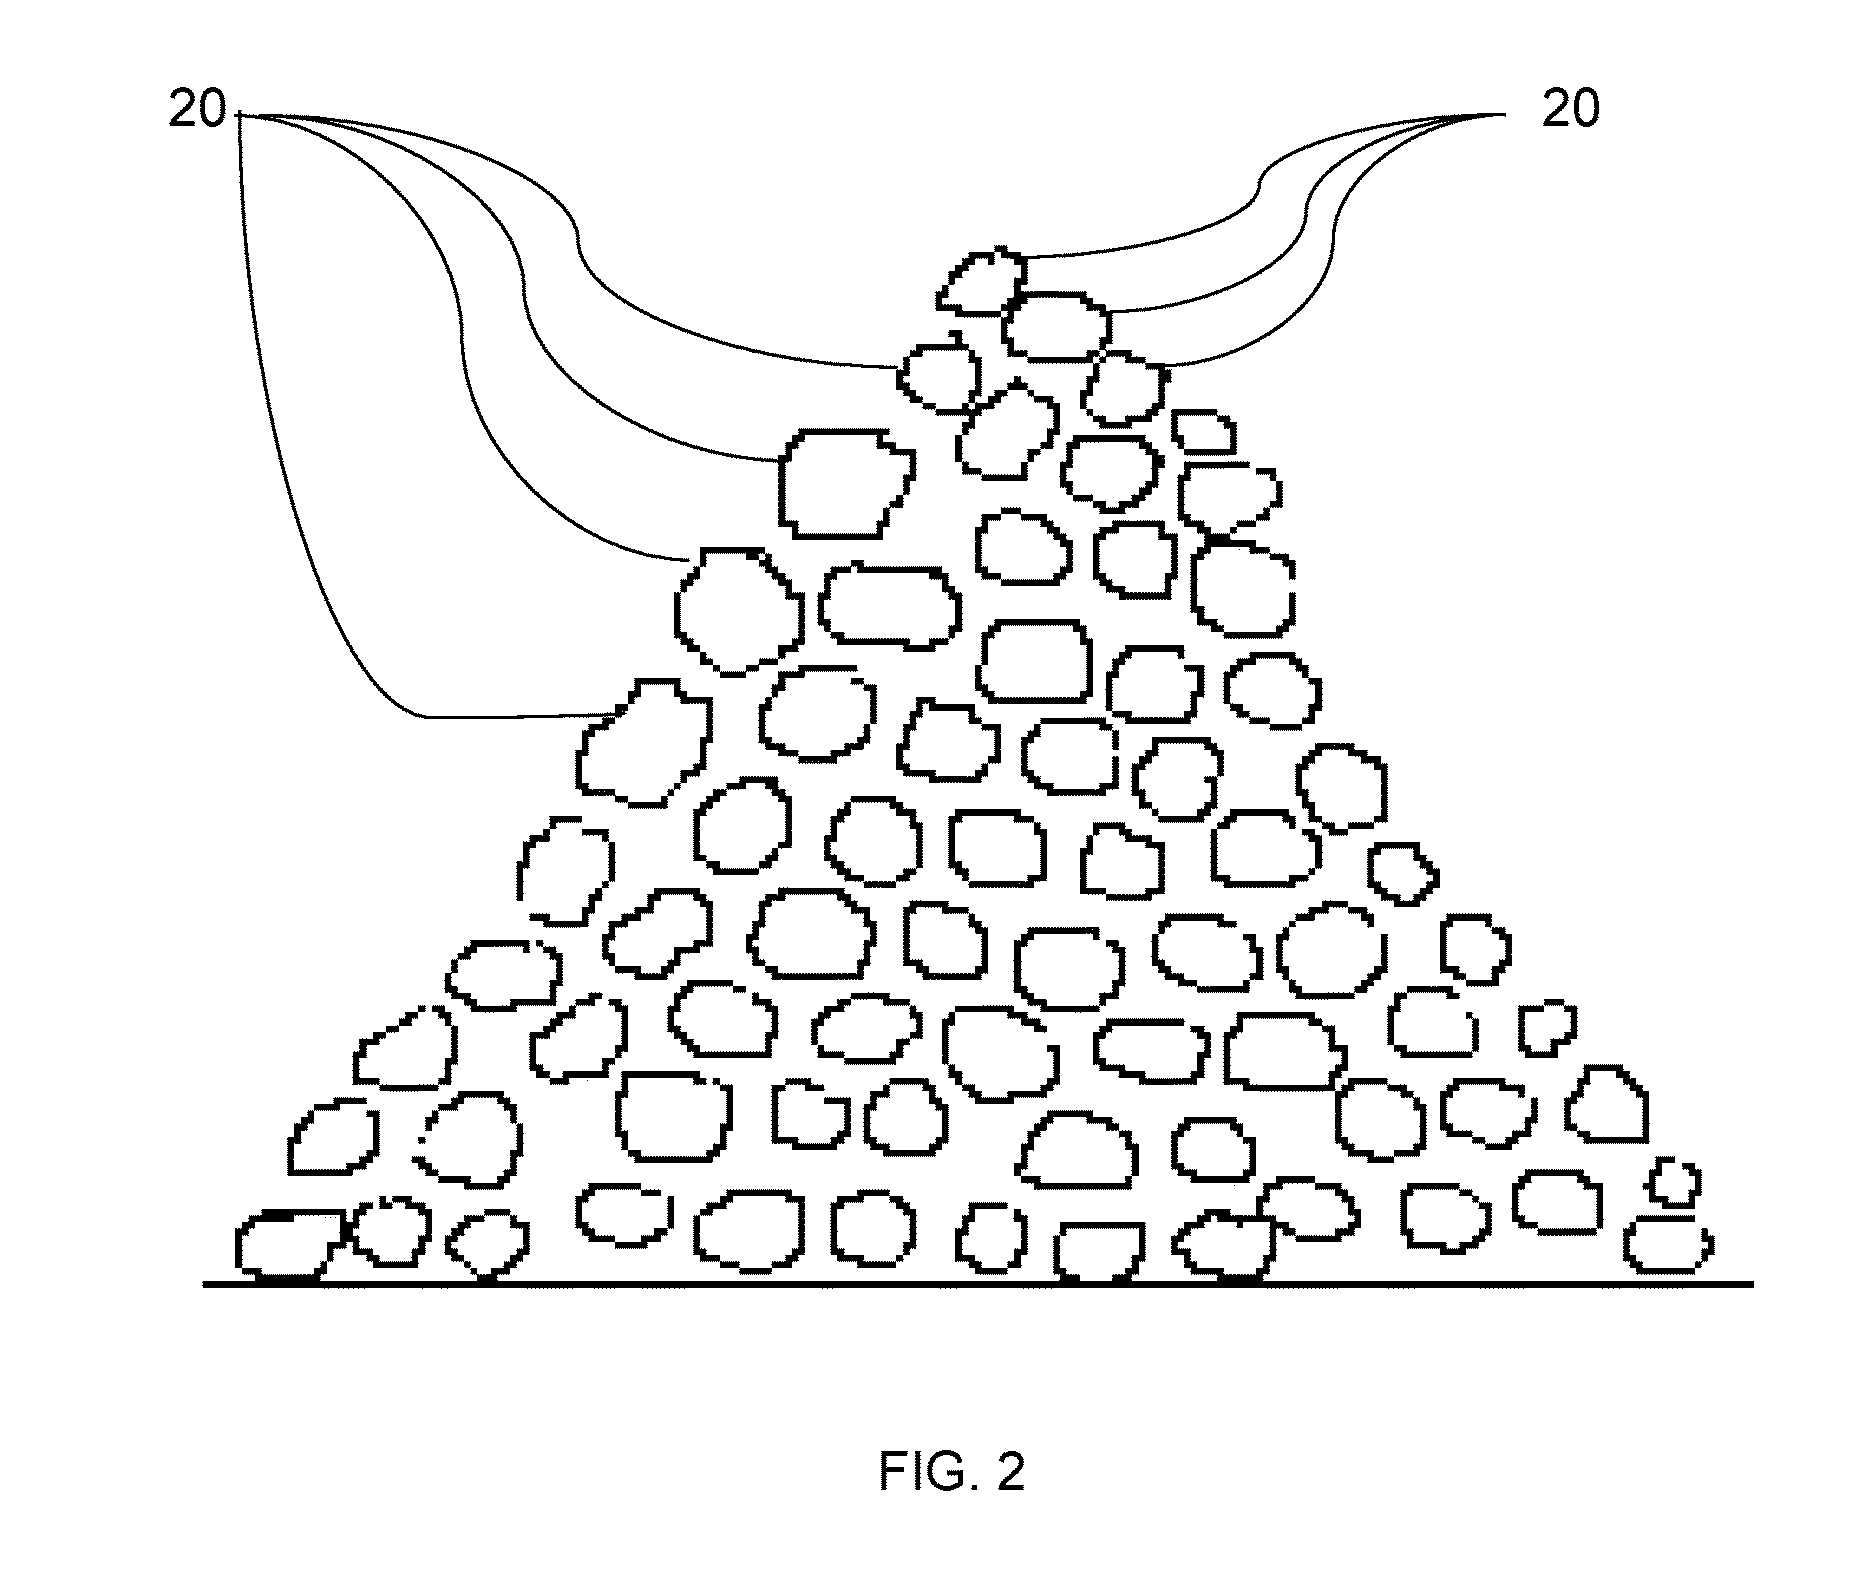 Process for making pellet product for use in soil neutralization and other applications